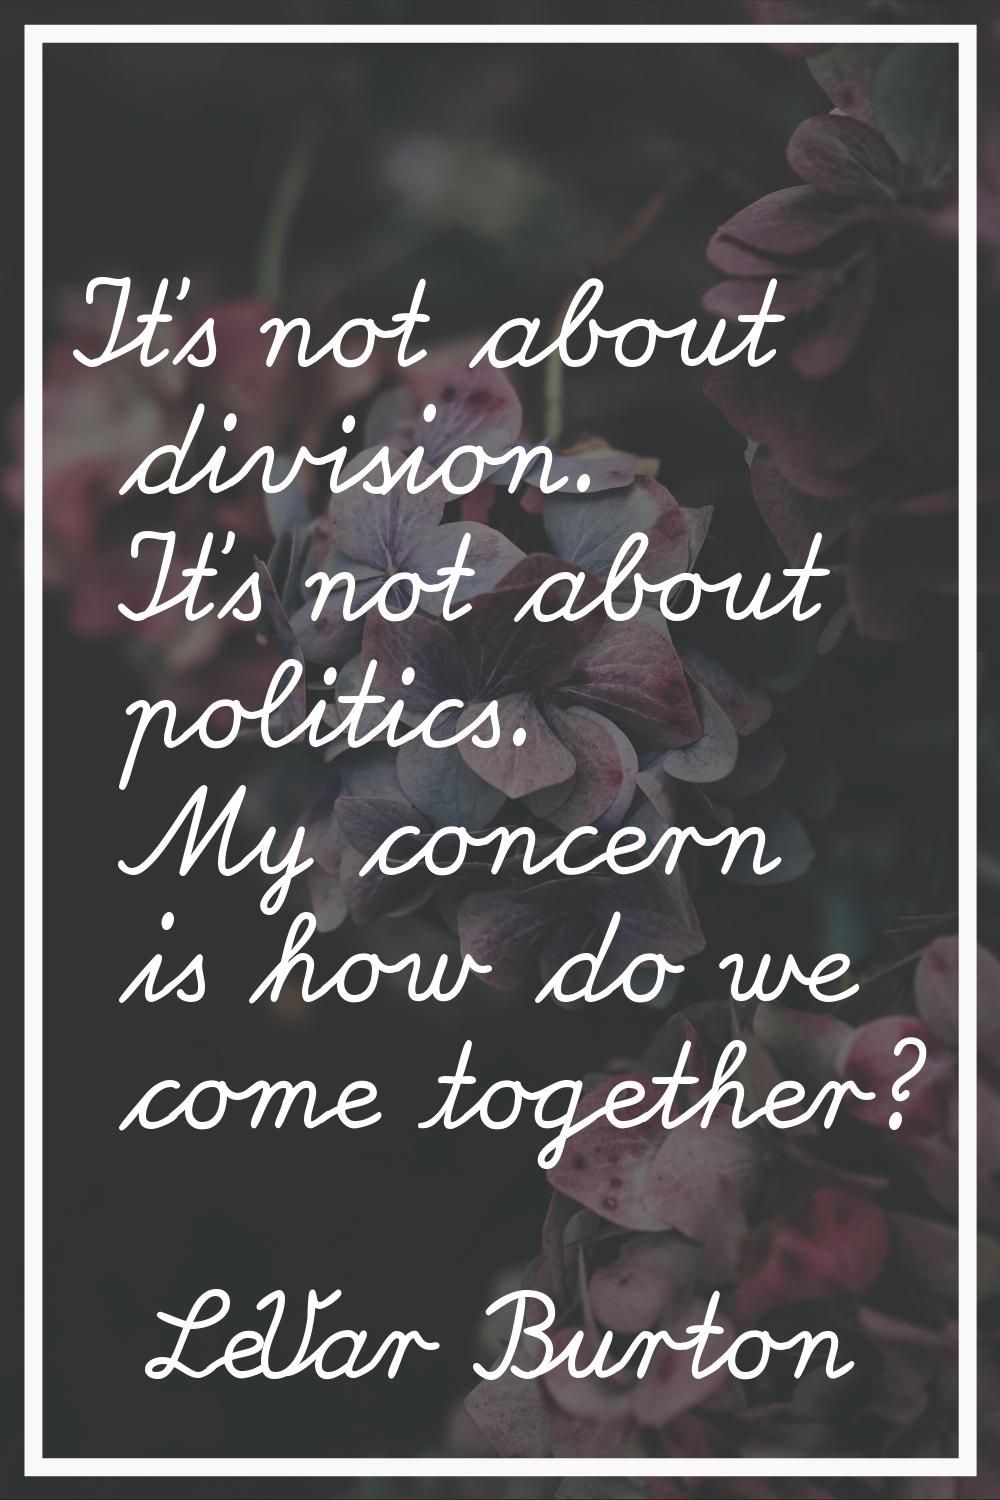 It's not about division. It's not about politics. My concern is how do we come together?